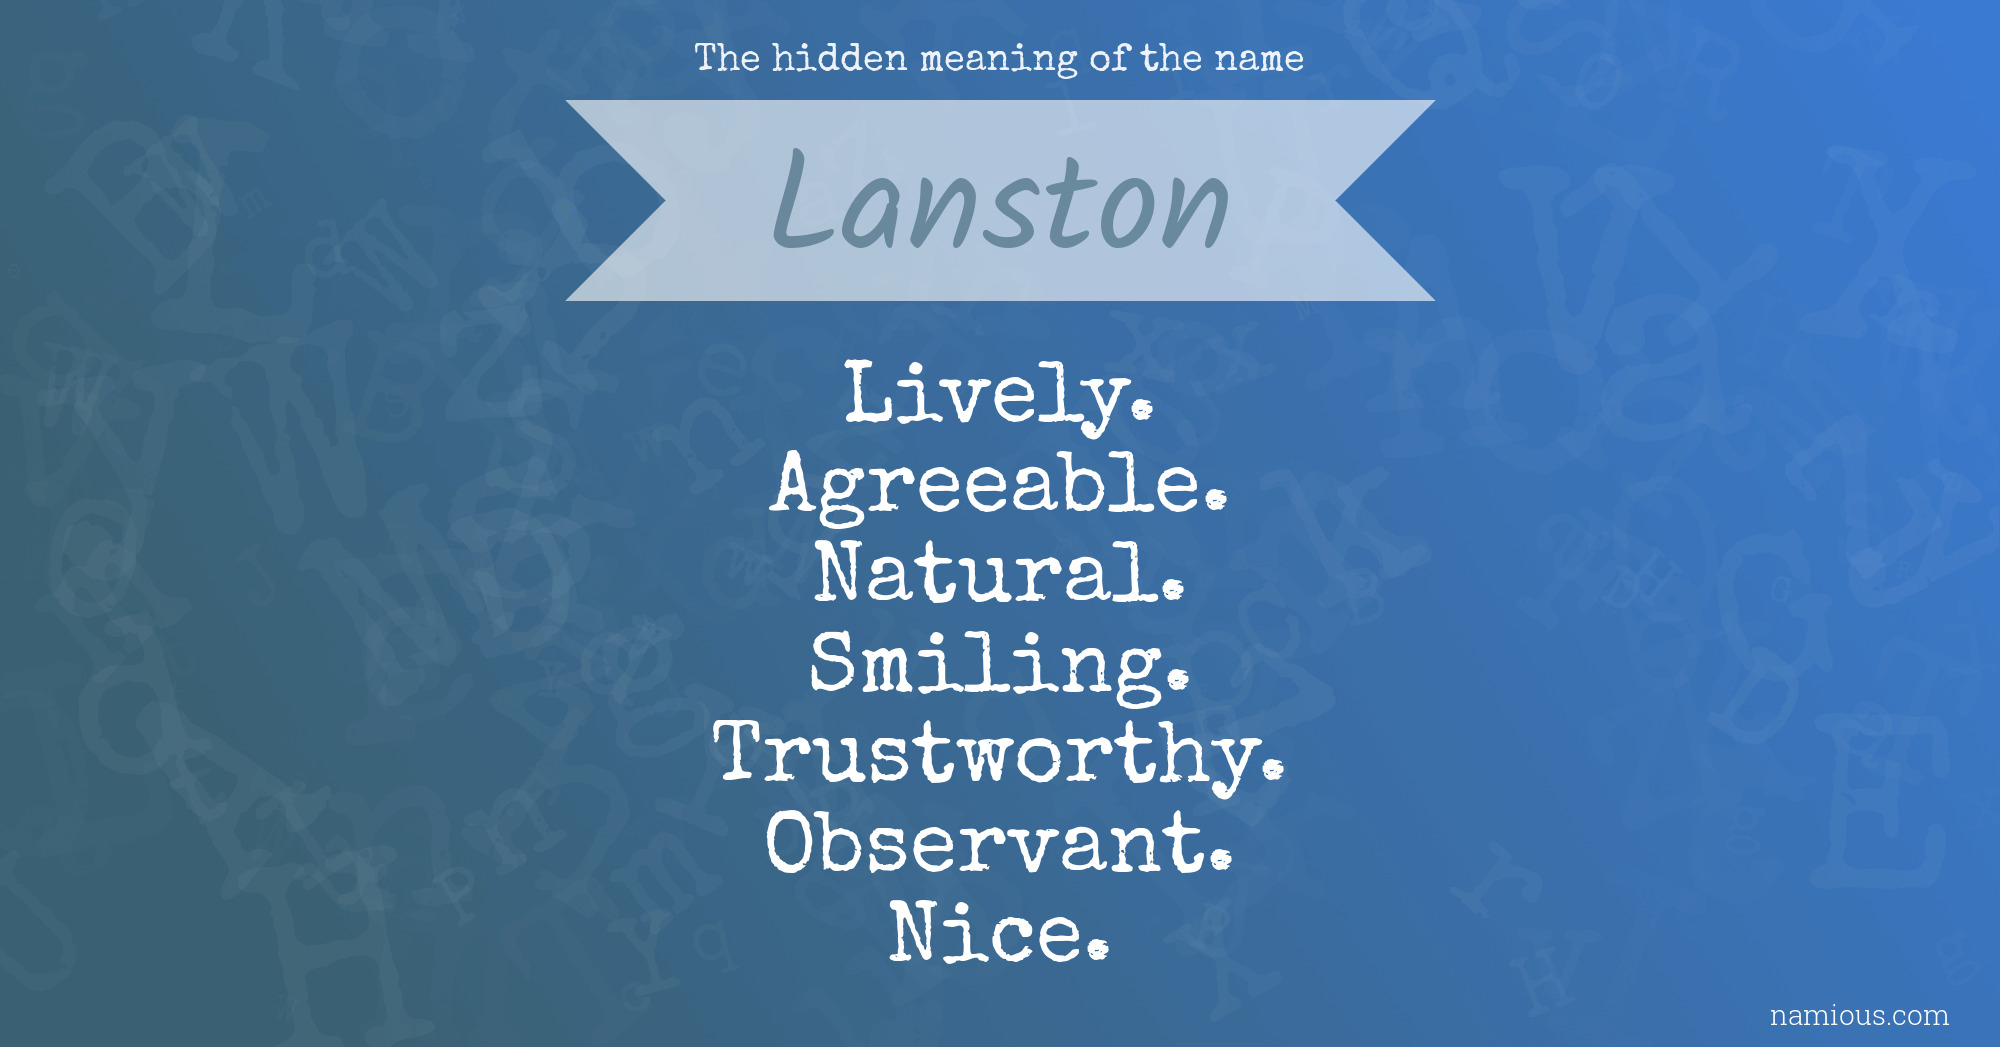 The hidden meaning of the name Lanston